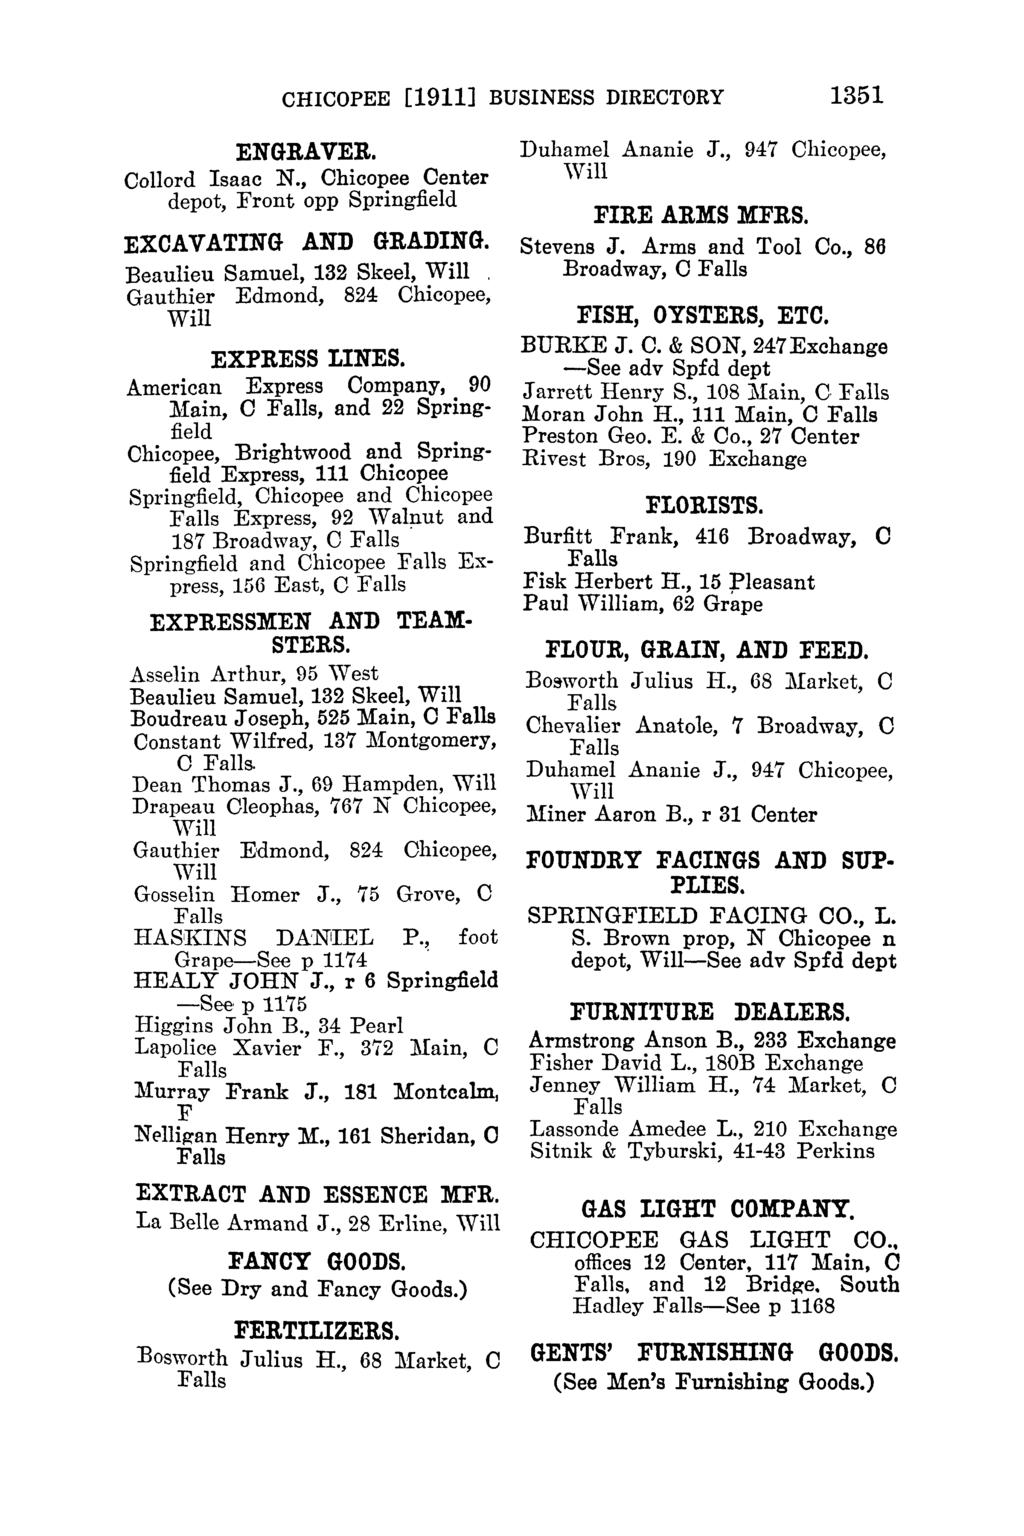 CHICOPEE [1911] BUSINESS DIRECTORY 1351 ENGRAVER. Collord Isaac N., Chicopee Center depot, opp Springfield EXCAVATING AND GRADING.